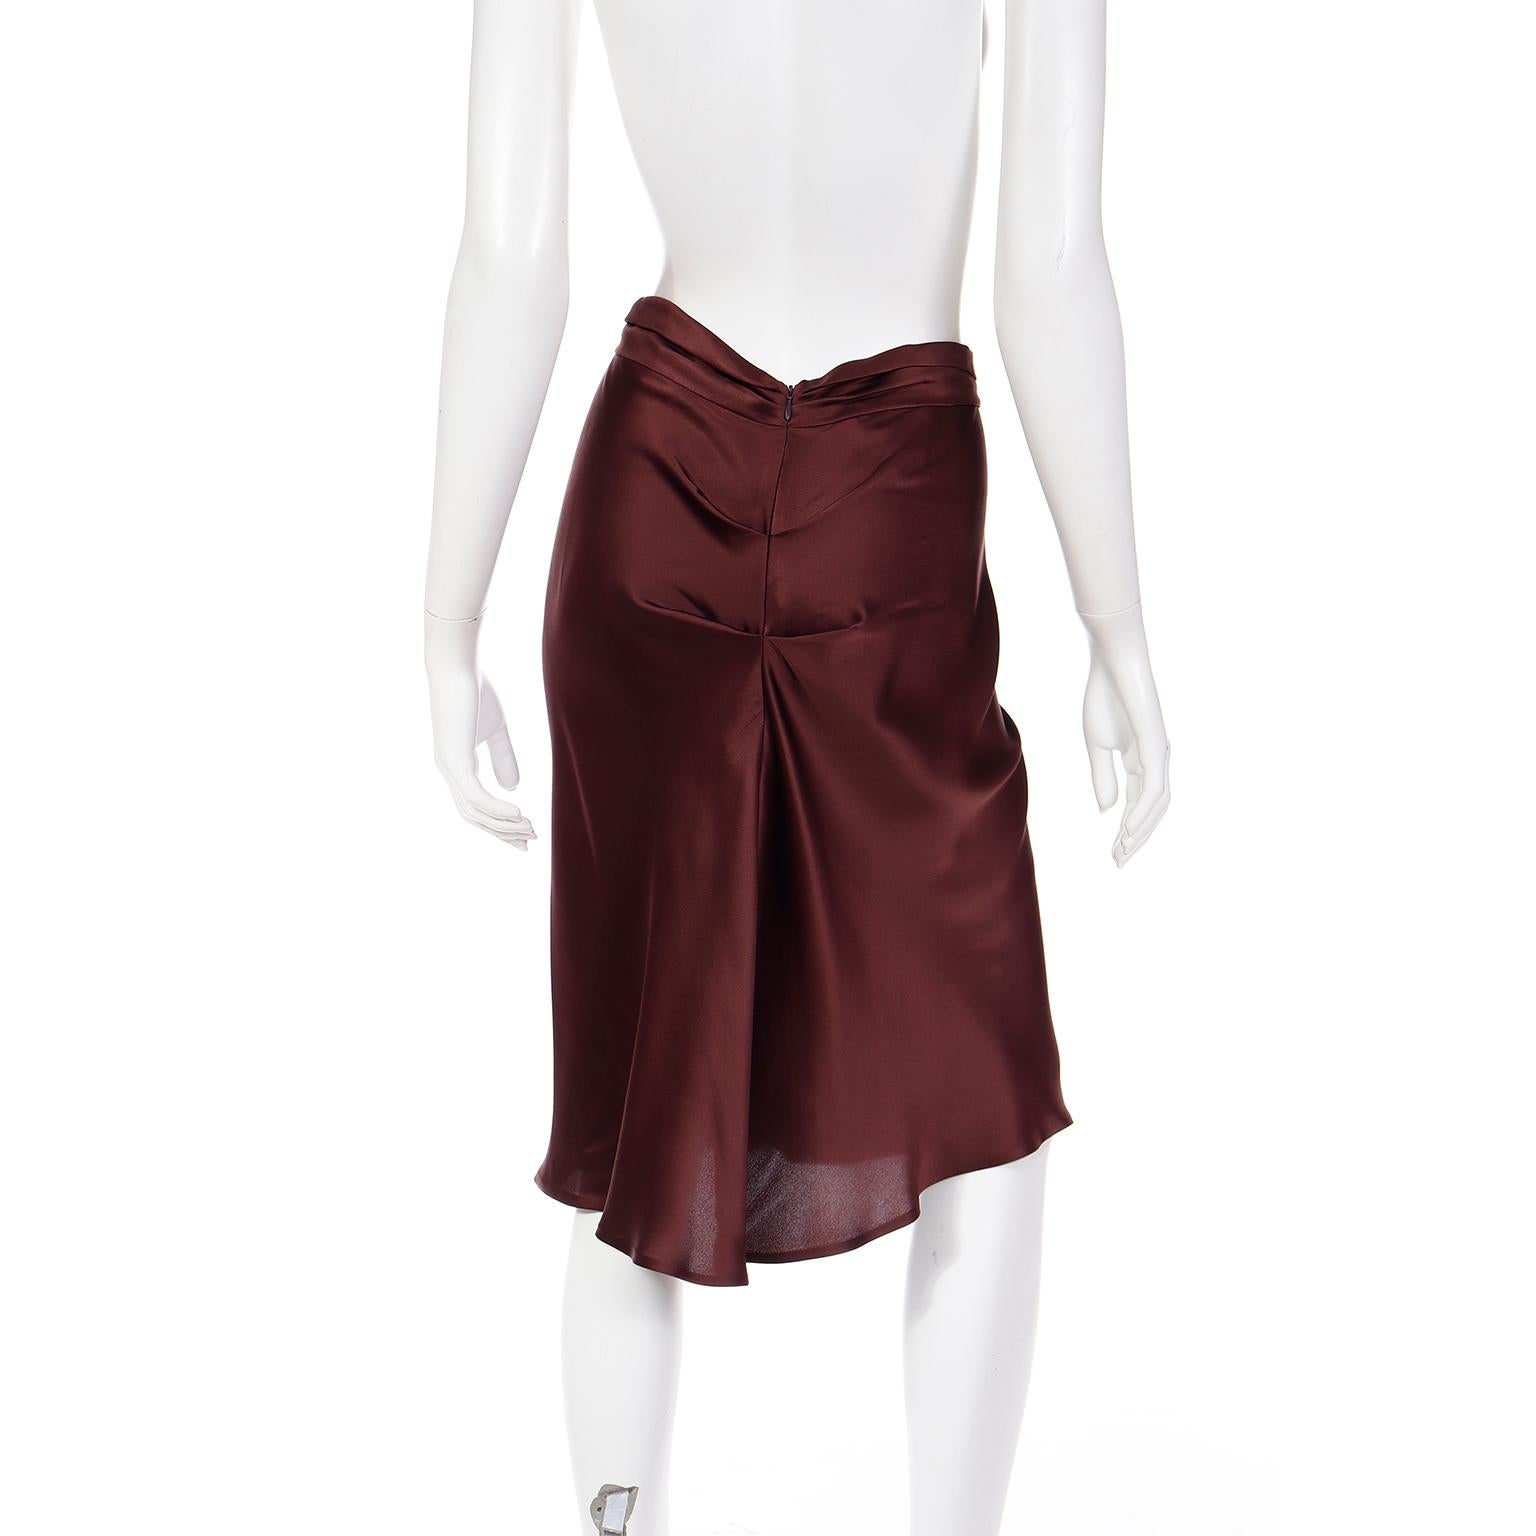 Alberta Ferretti Brown Silk Charmeuse Vintage Skirt In Excellent Condition For Sale In Portland, OR